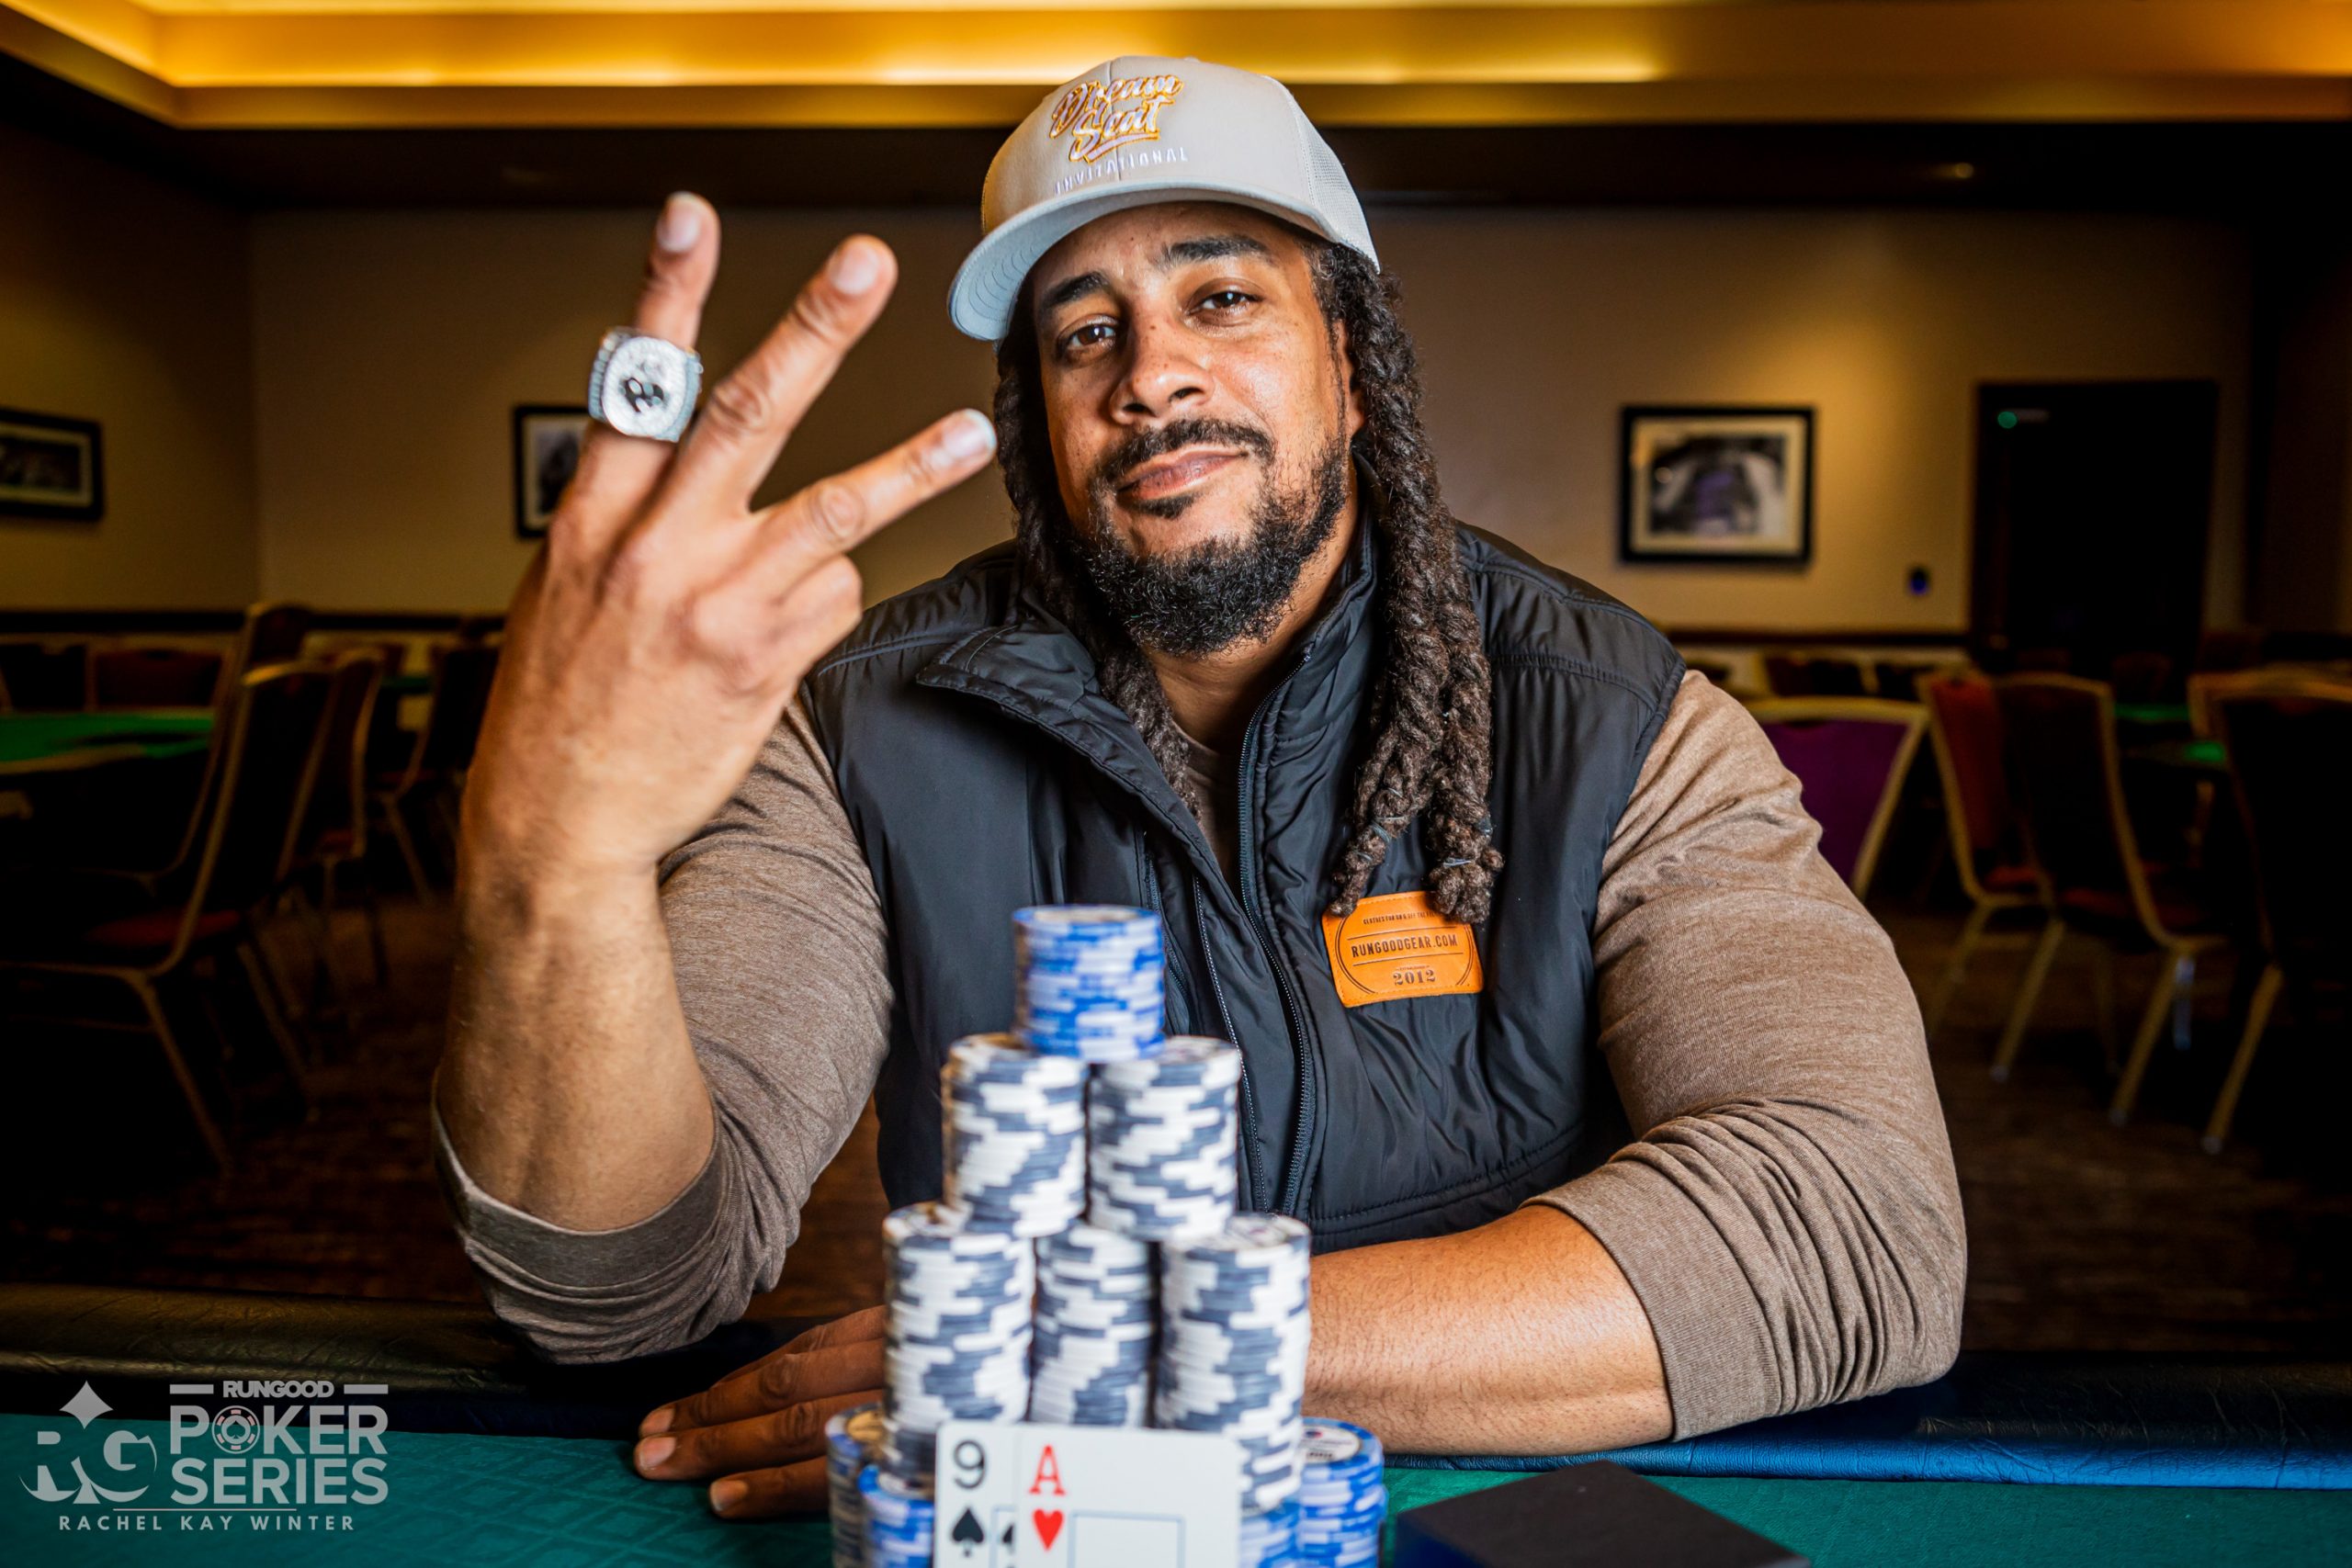 Andre Allen Comes Back from One Big Blind to Win RGPS Joplin Main Event